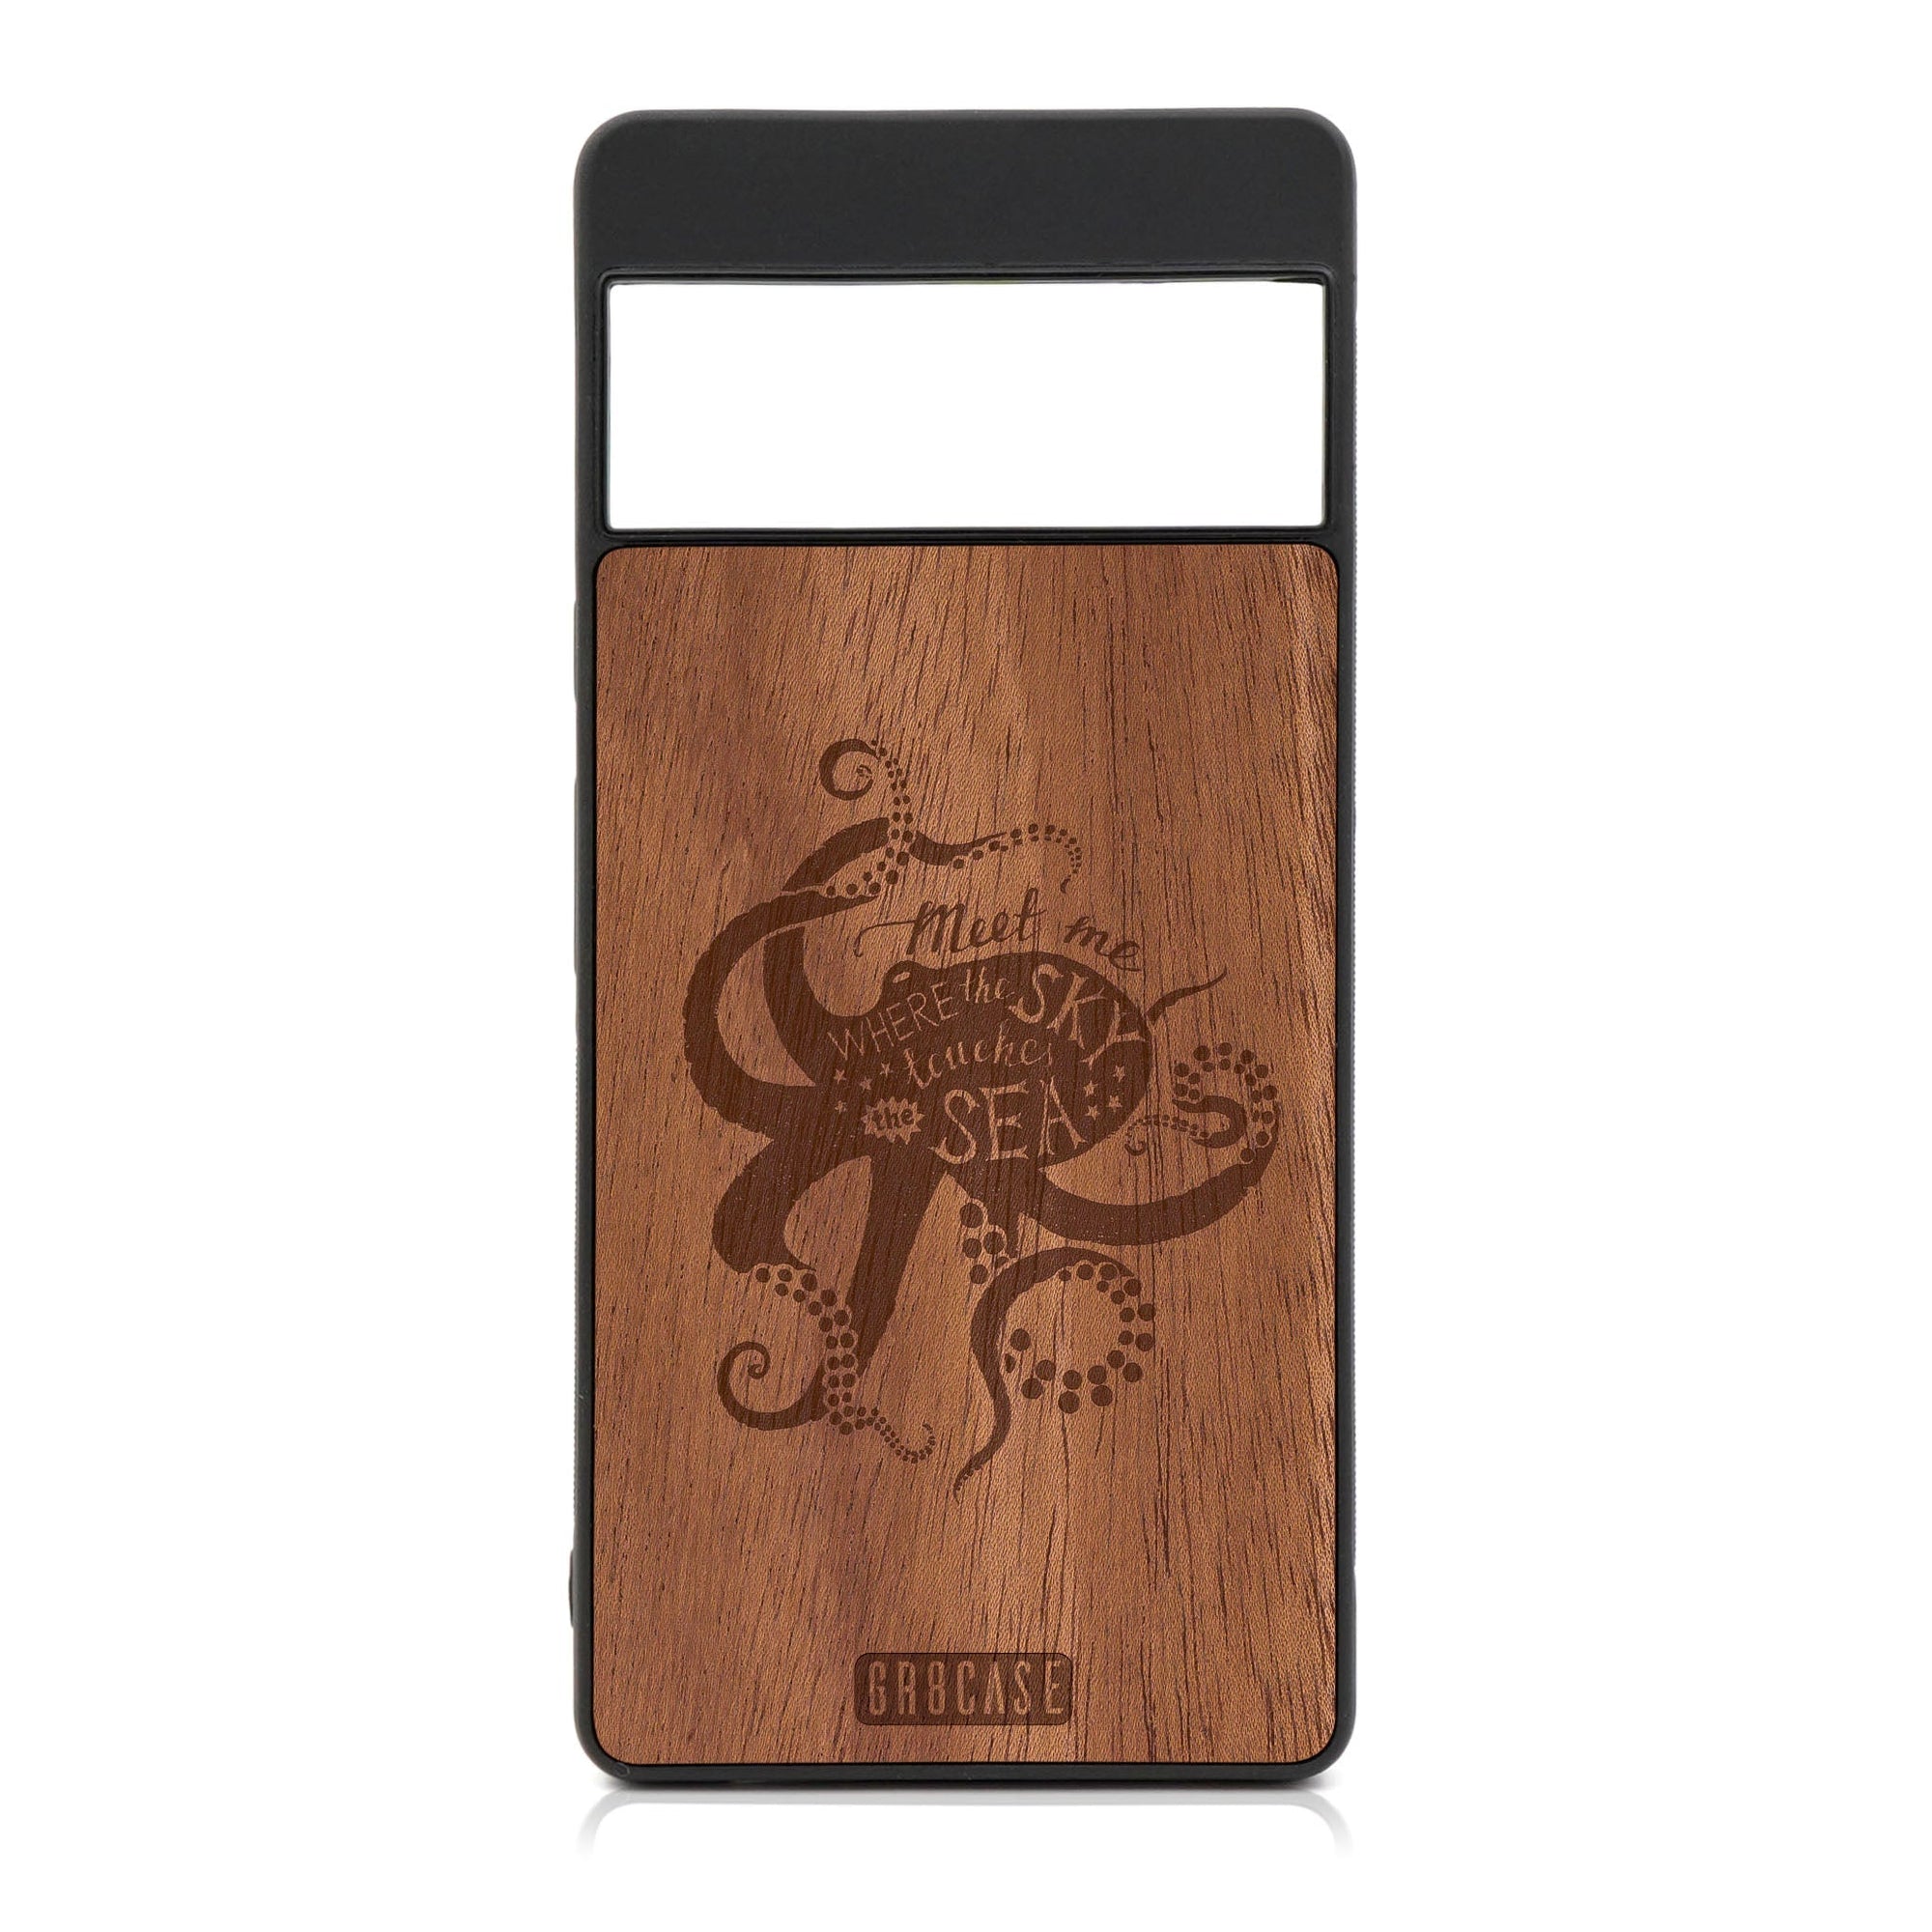 Meet Me Where The Sky Touches The Sea (Octopus) Design Wood Case For Google Pixel 6A